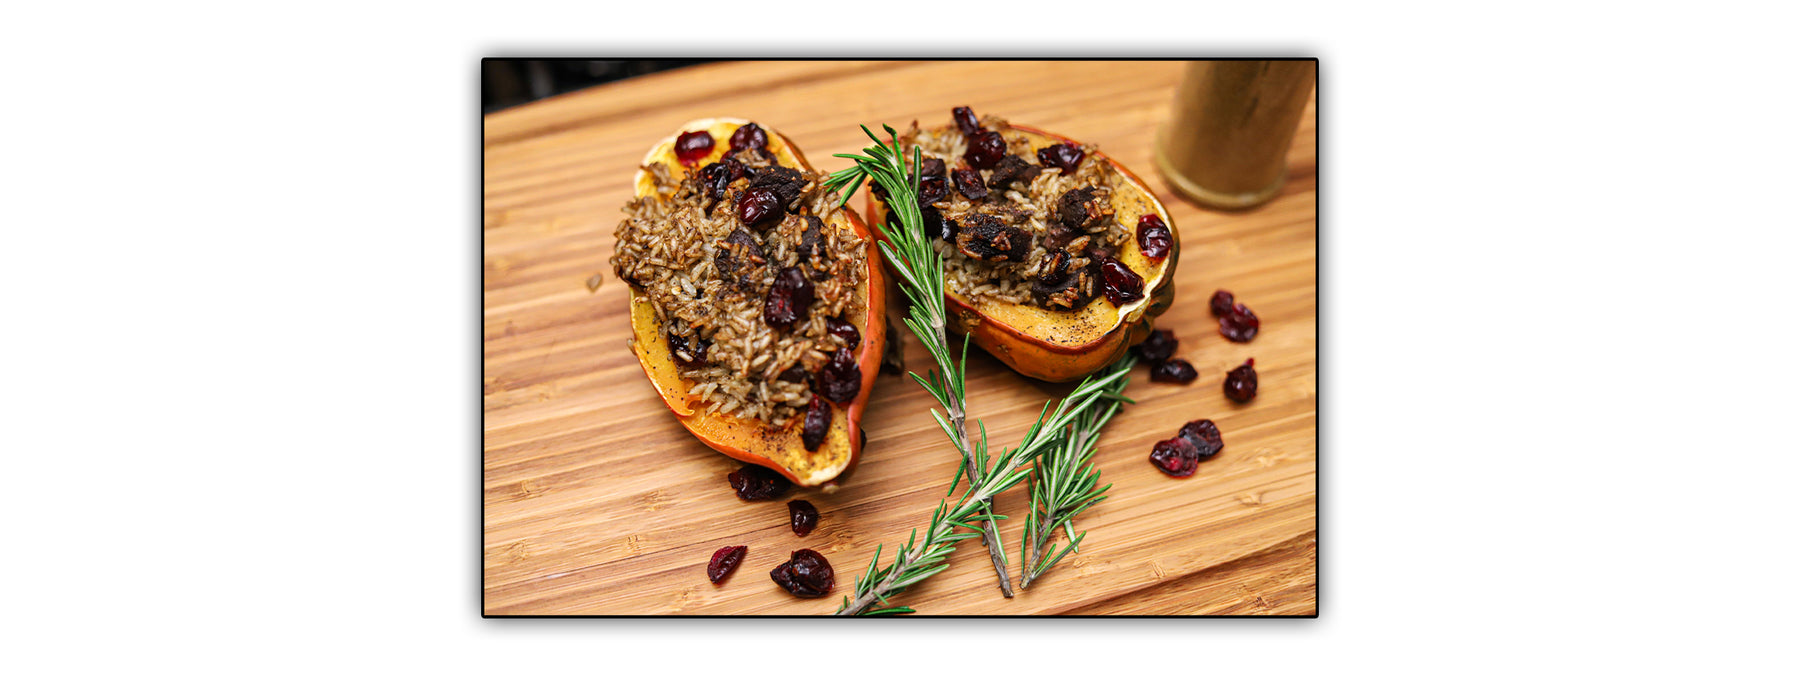 Acorn Squash stuffed with Venison, Brown Rice and Cranberries